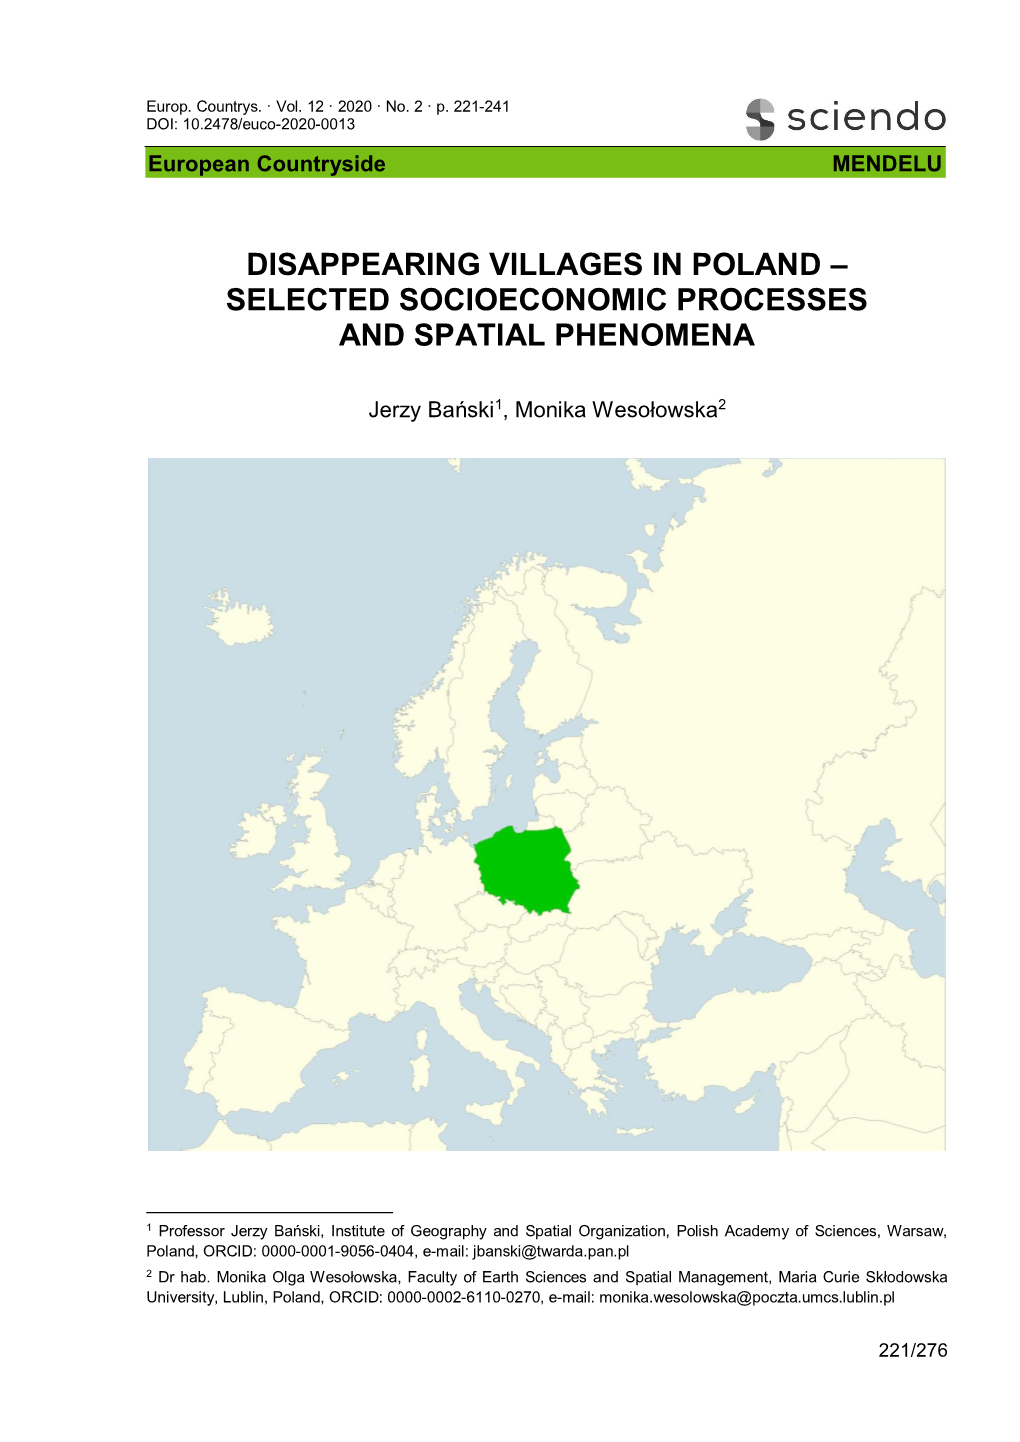 Disappearing Villages in Poland – Selected Socioeconomic Processes and Spatial Phenomena